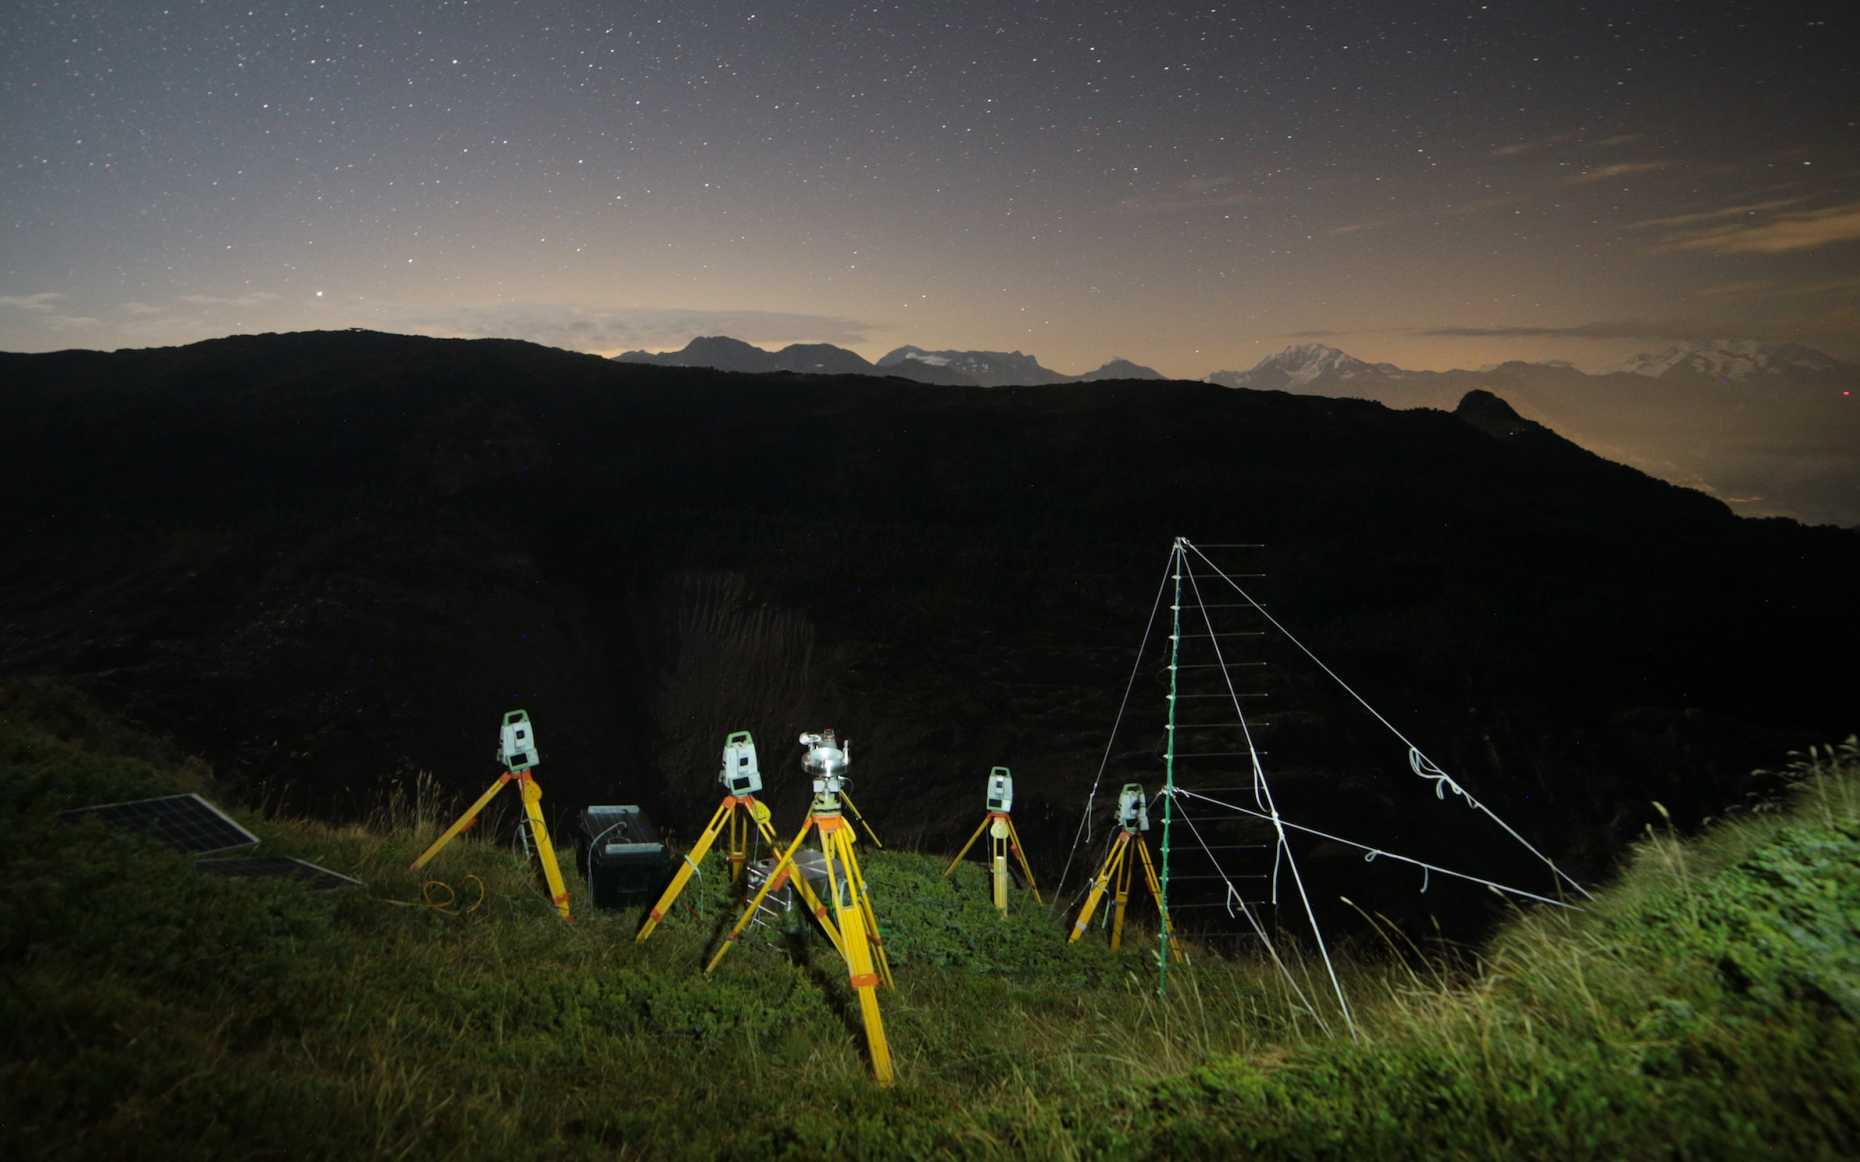 Image of several total stations in the night